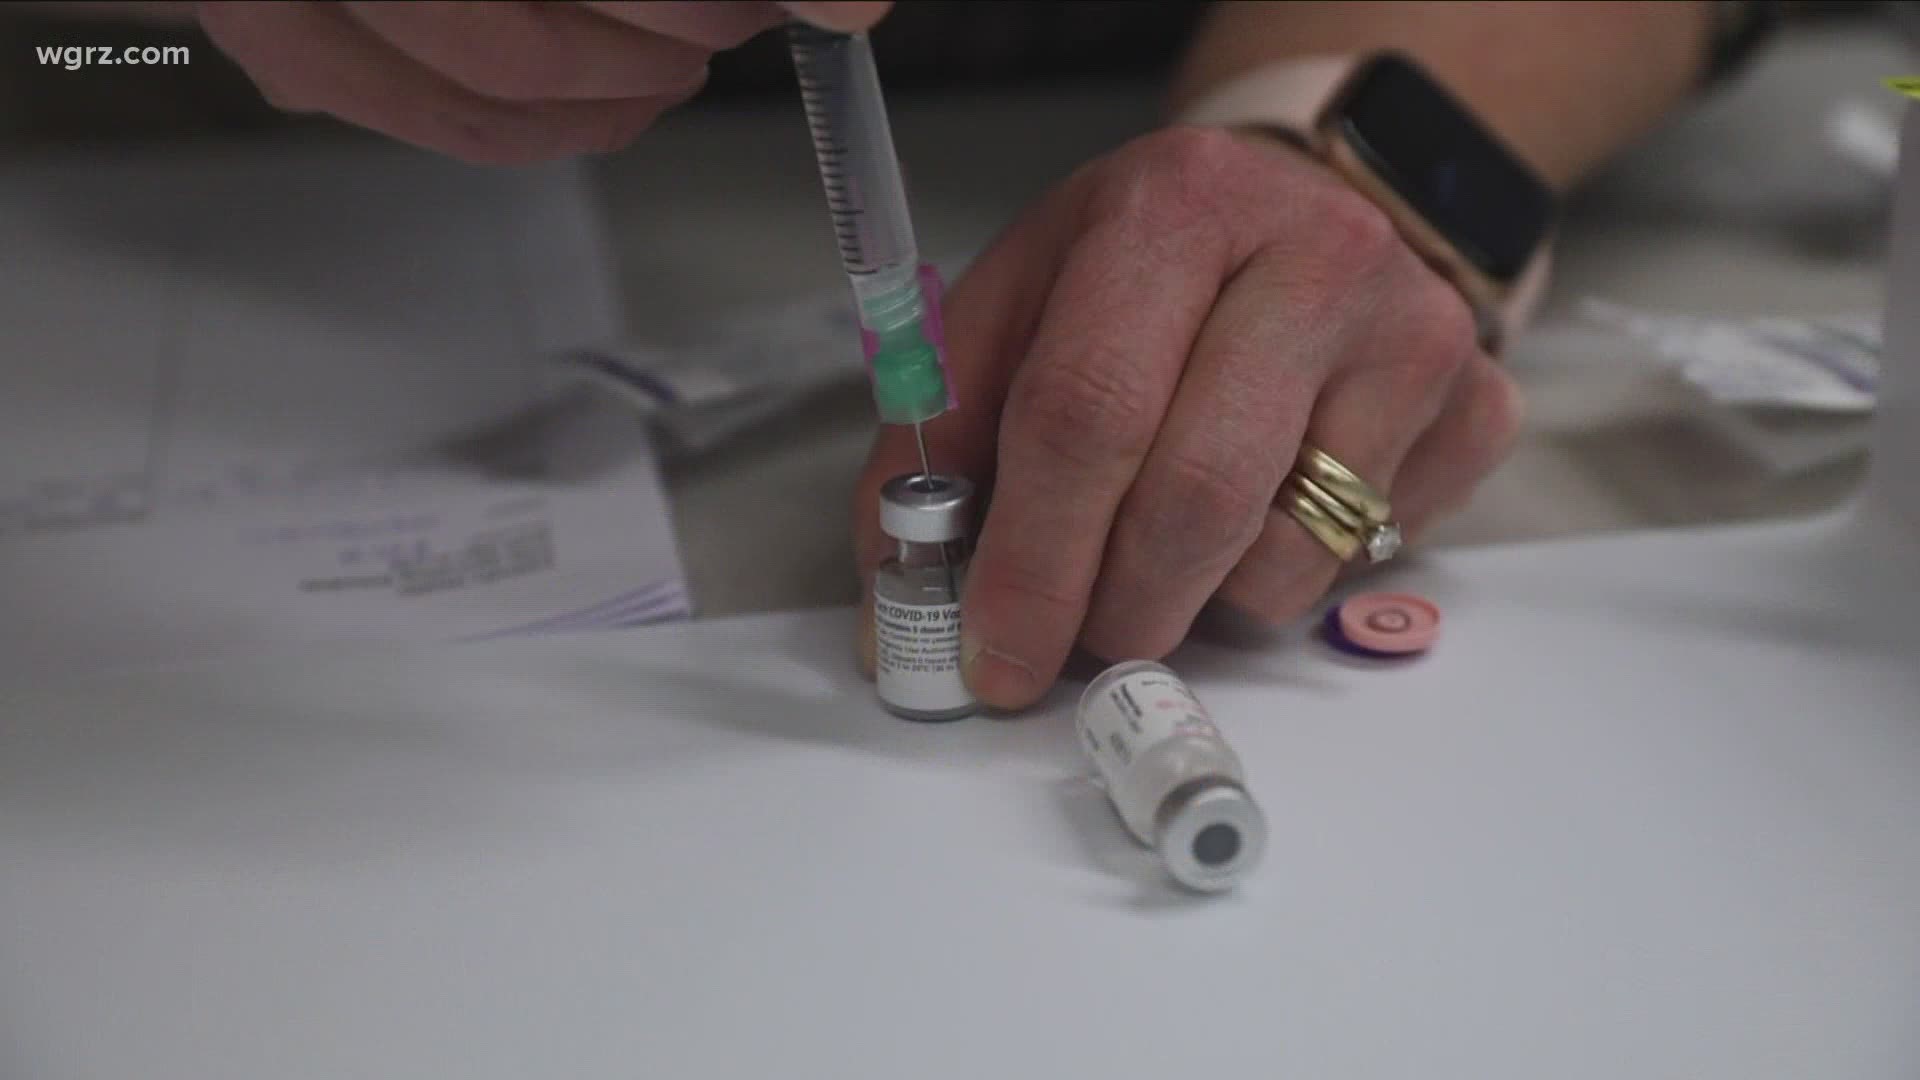 By weeks end, New York could have almost one-million covid-19 vaccines distributed statewide.
But now there's some criticism coming from Governor Cuomo..